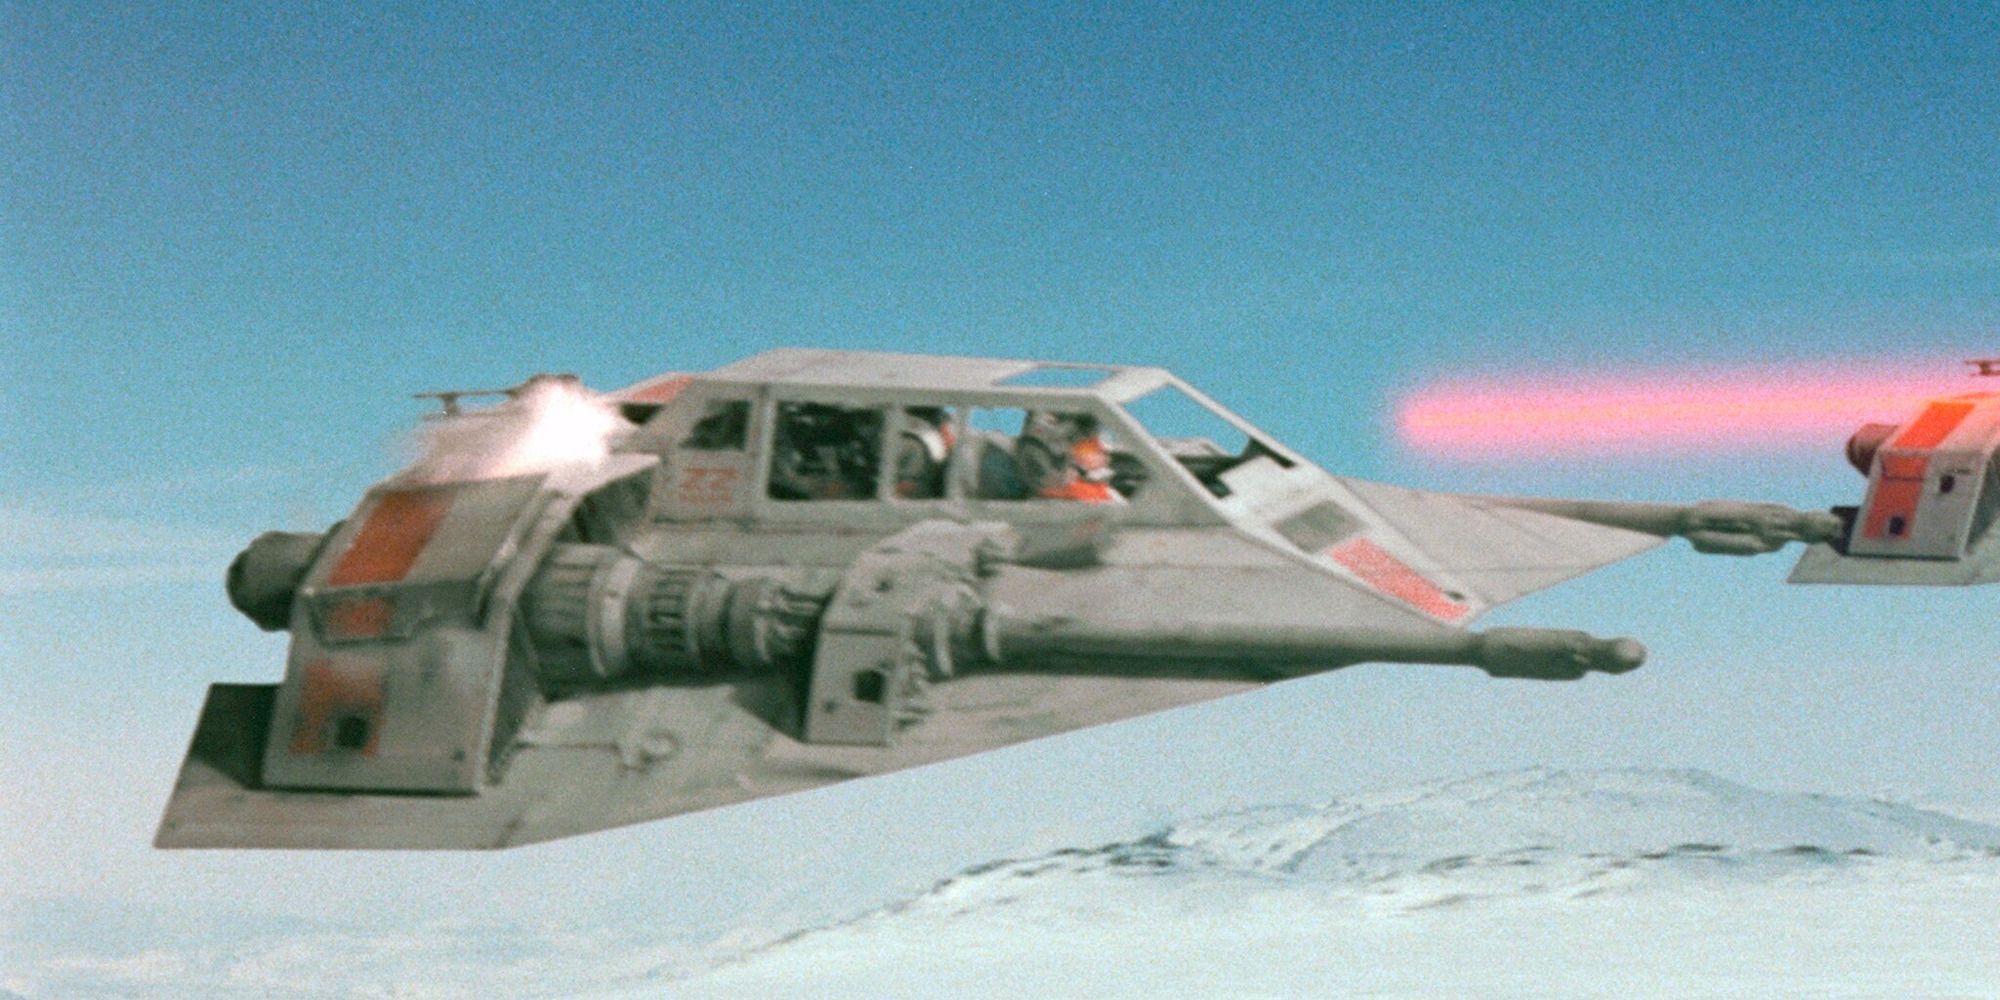 Snowspeeder from 'The Empire Strikes Back', flying through Hoth shooting lasers